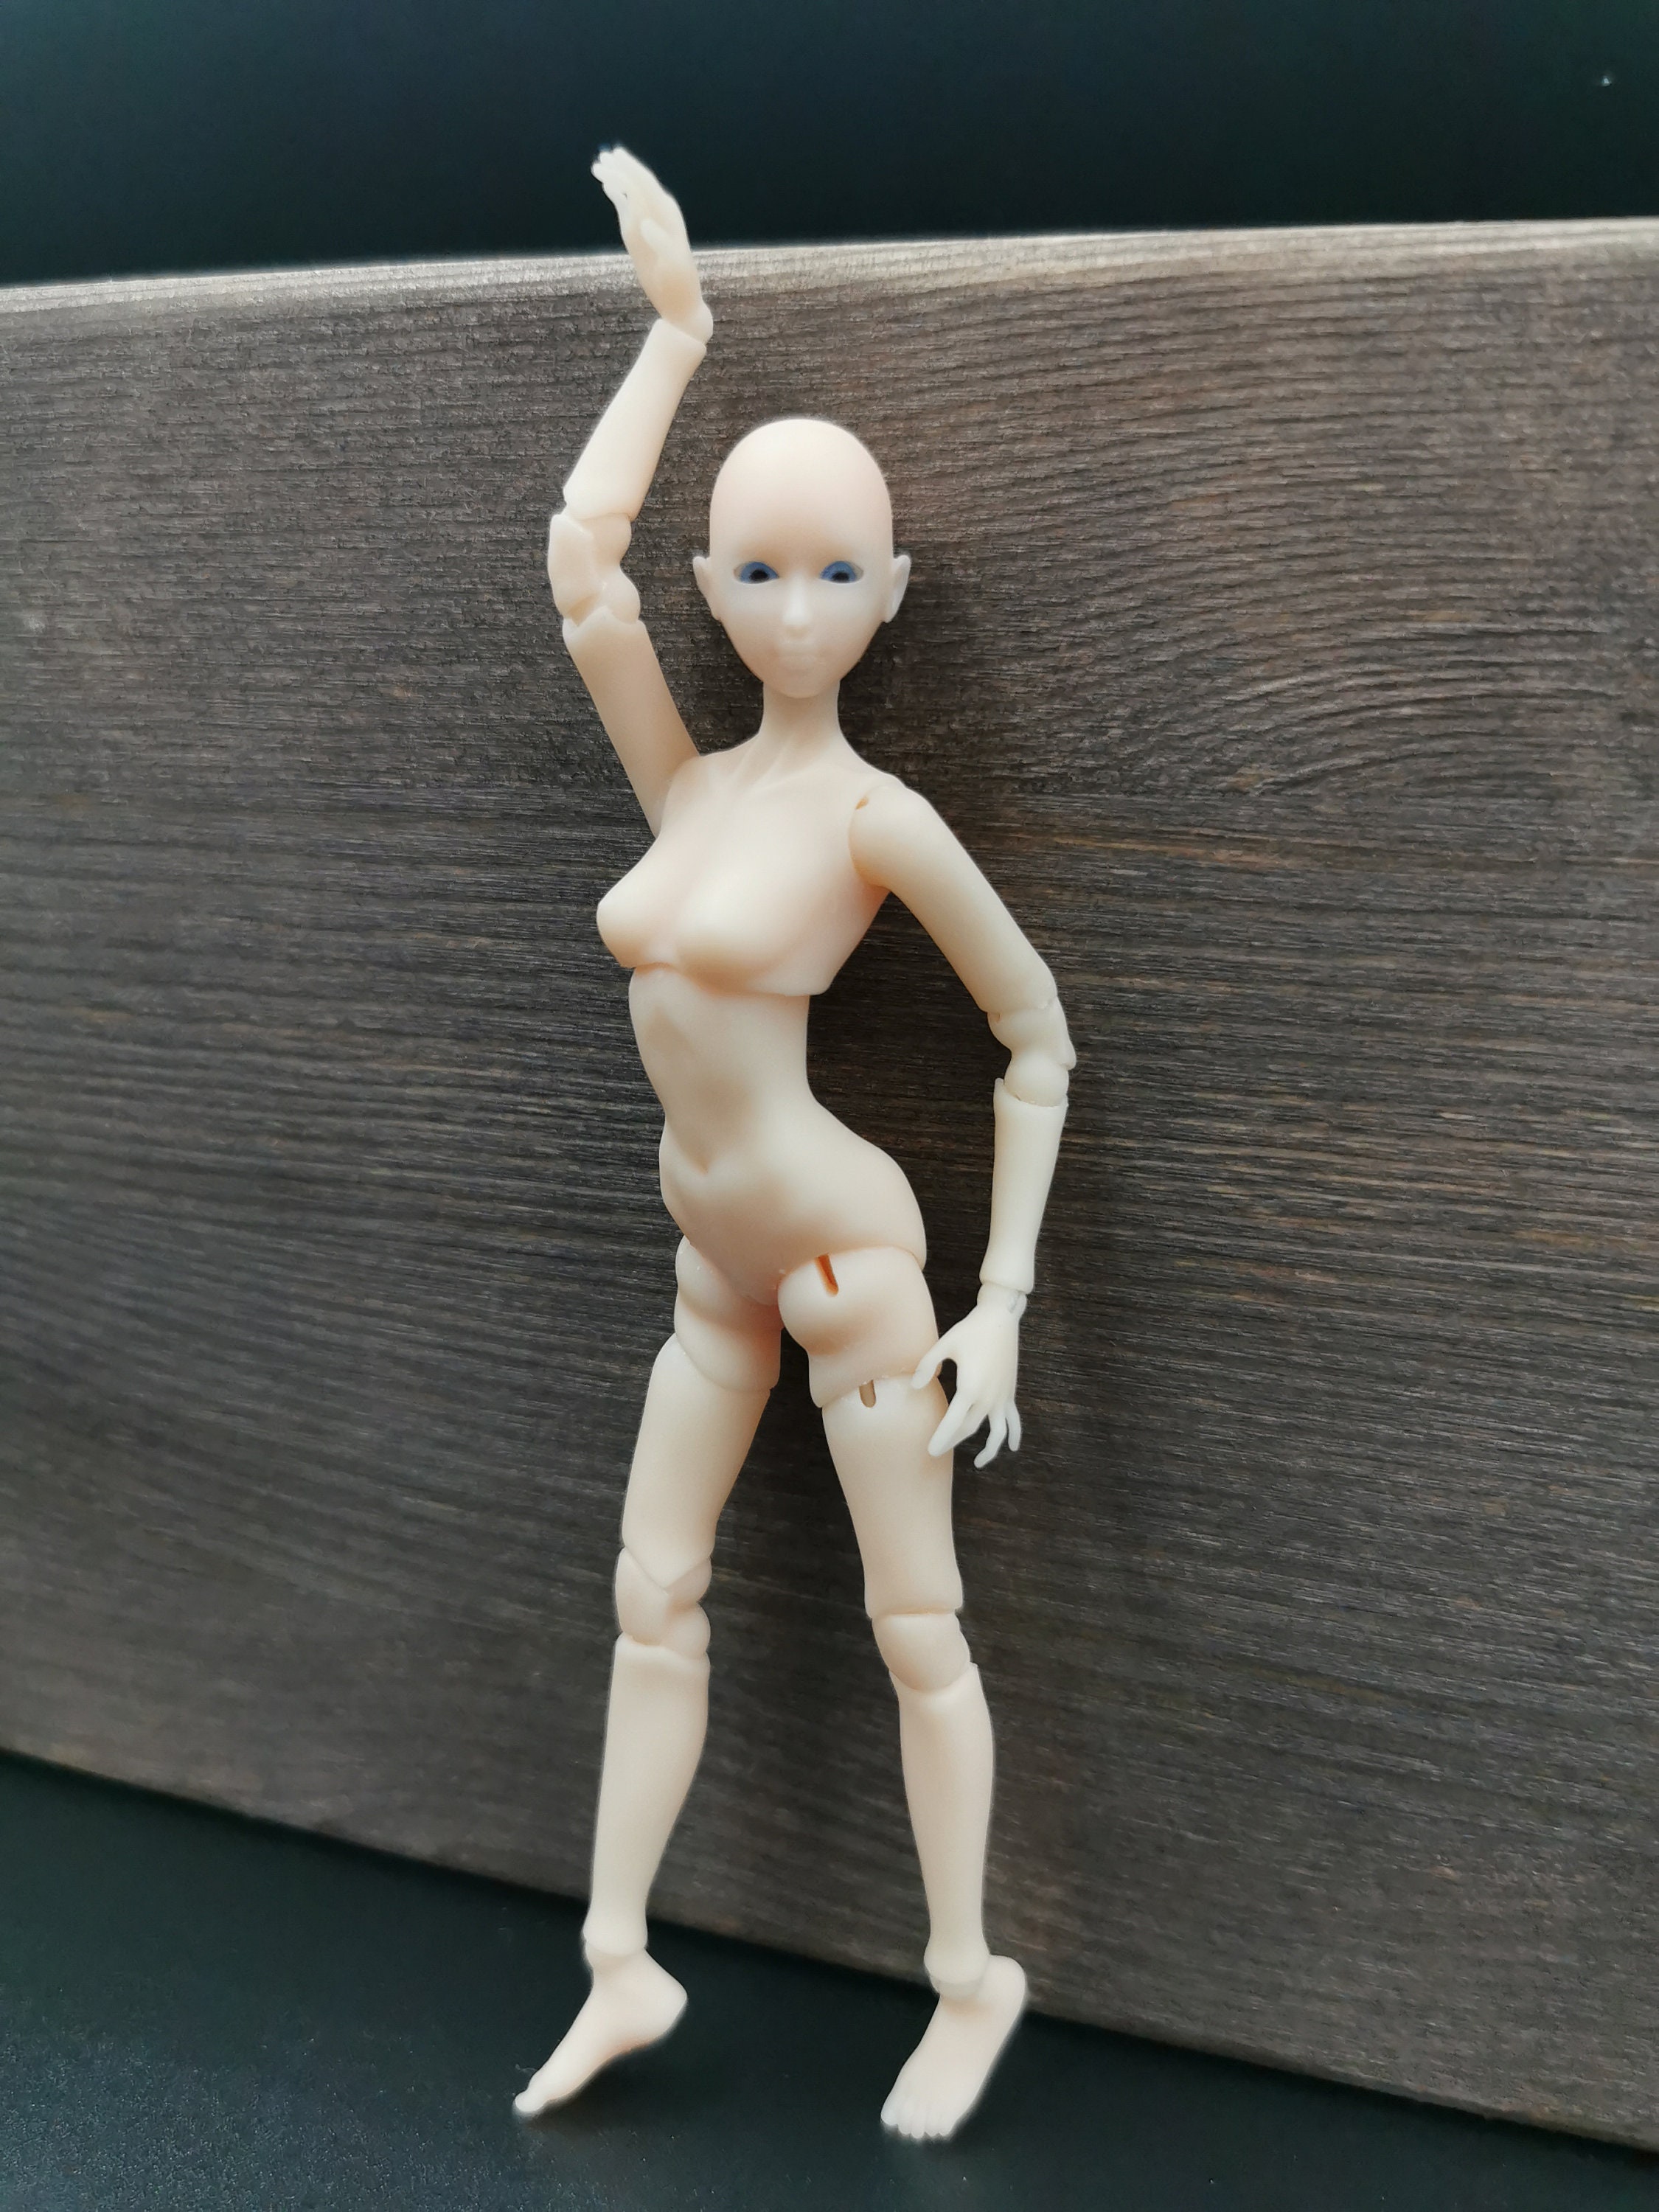 1 12 scale ball jointed doll